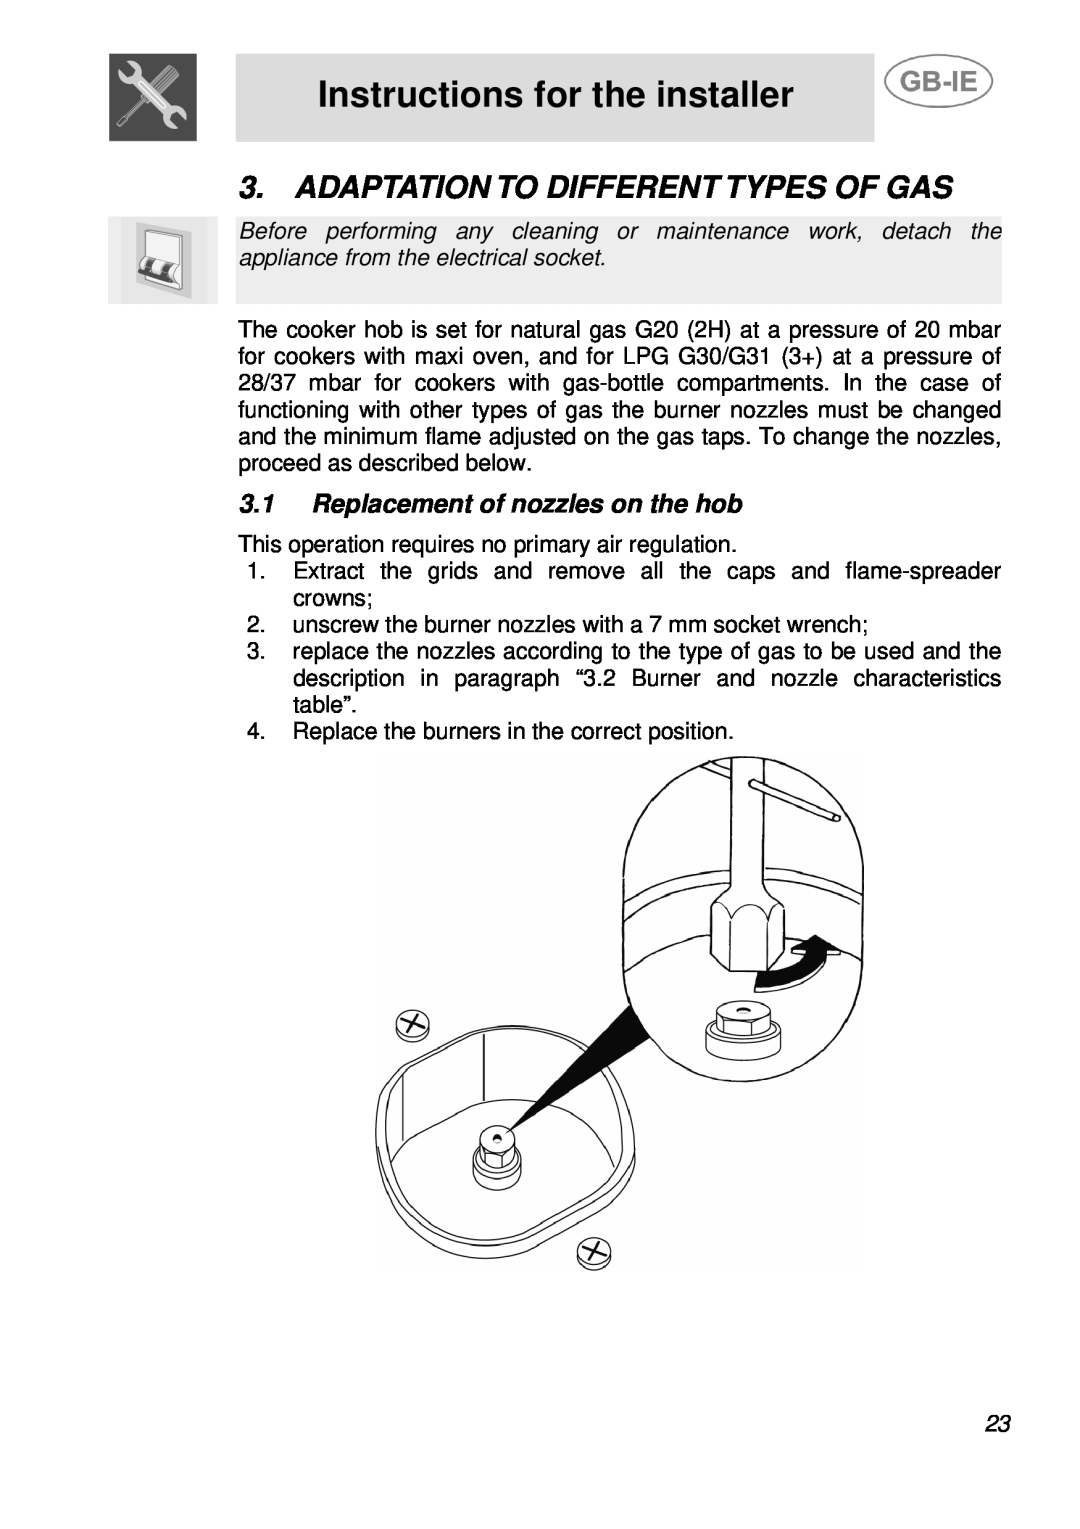 Smeg AS21T76F Adaptation To Different Types Of Gas, Replacement of nozzles on the hob, Instructions for the installer 